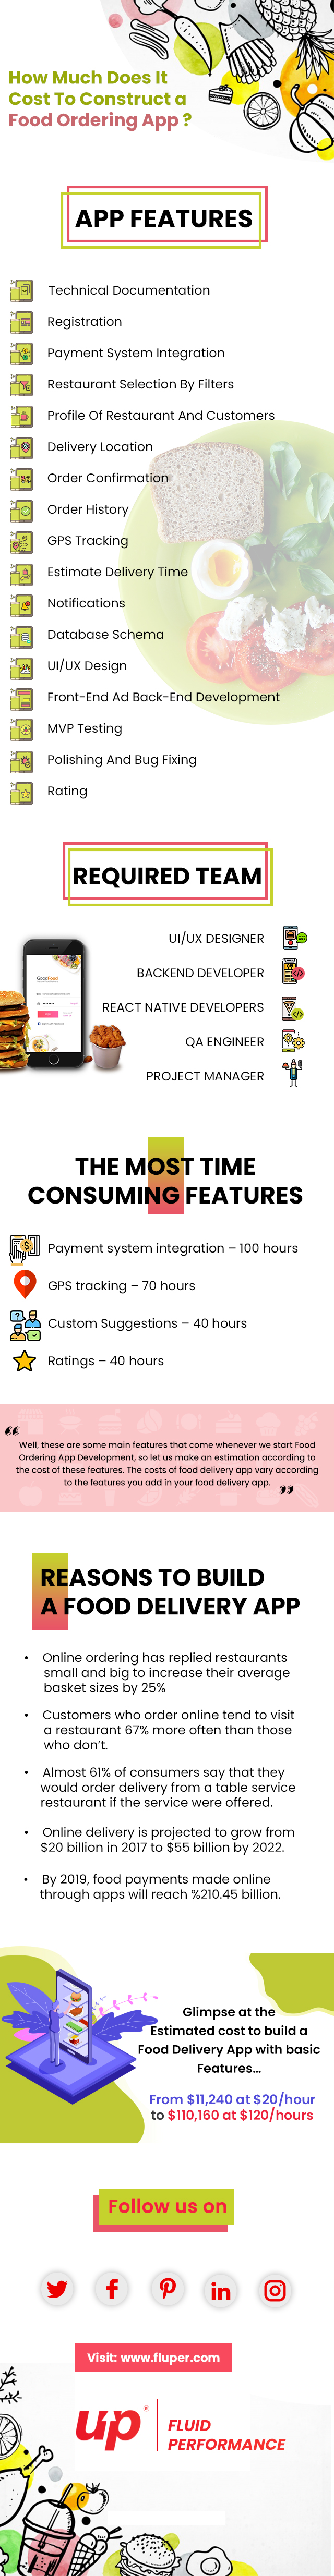 How Much Does It Cost To Construct a Food Ordering App?